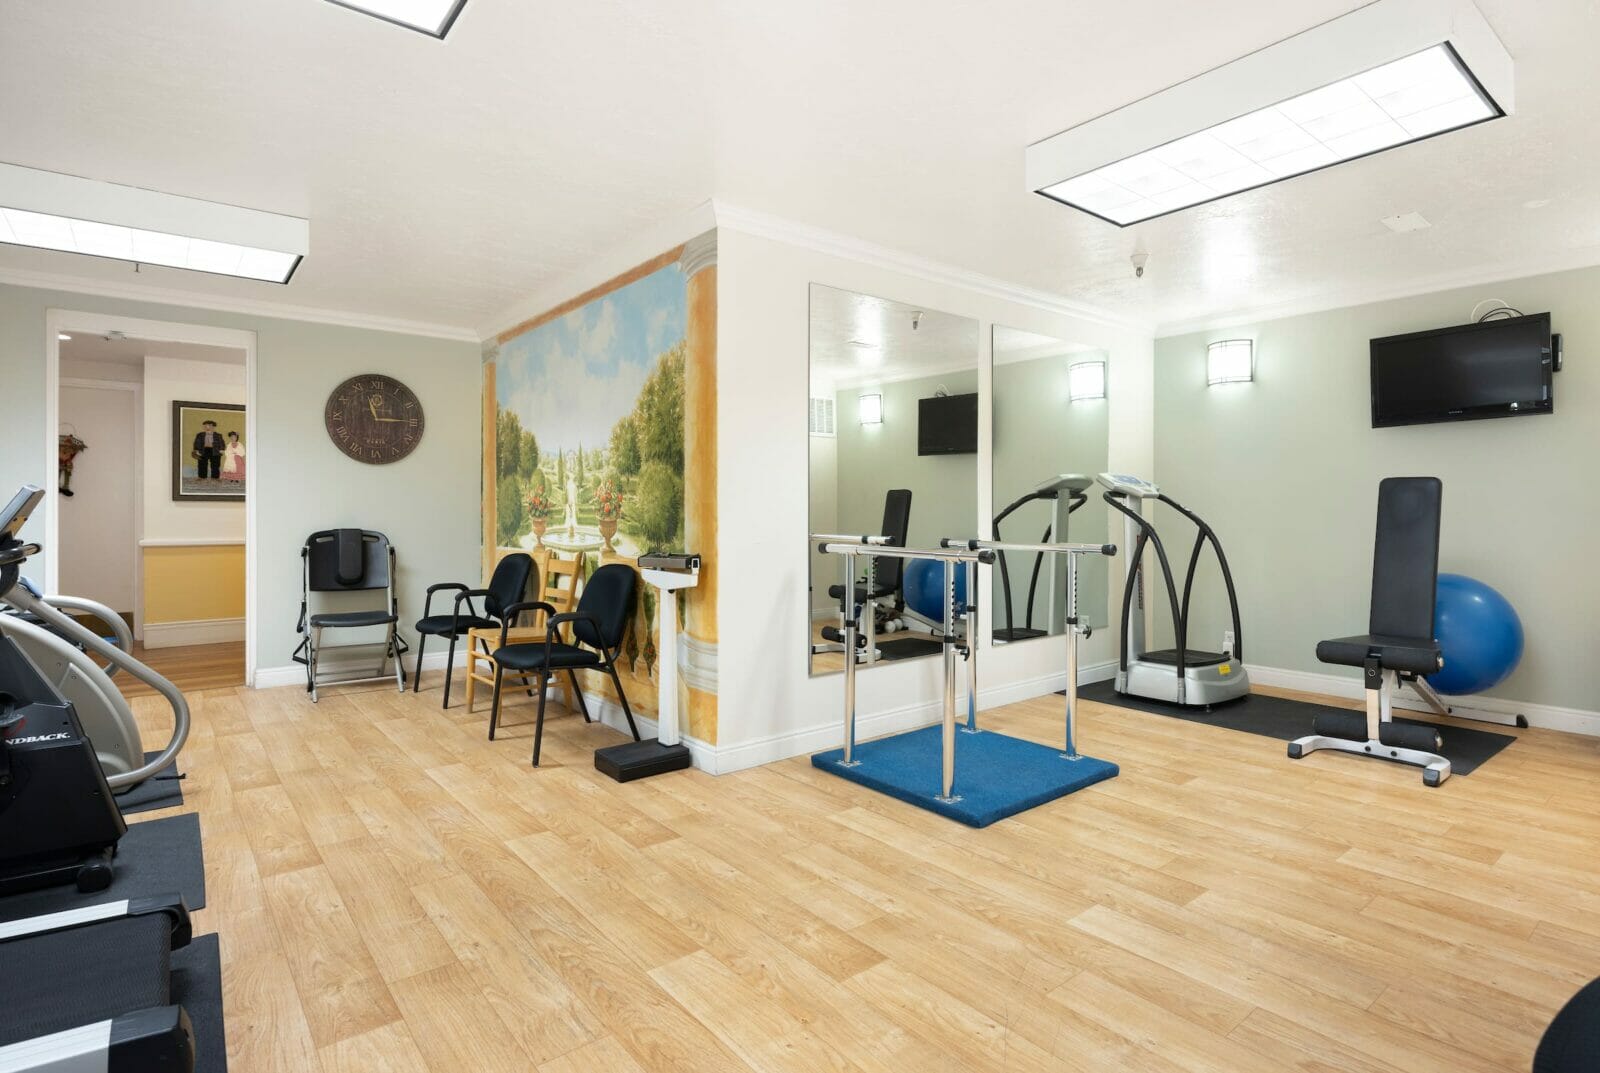 Gym and Physical Therapy Room at Park Lane Senior Living Independent Living in Salt Lake City Utah